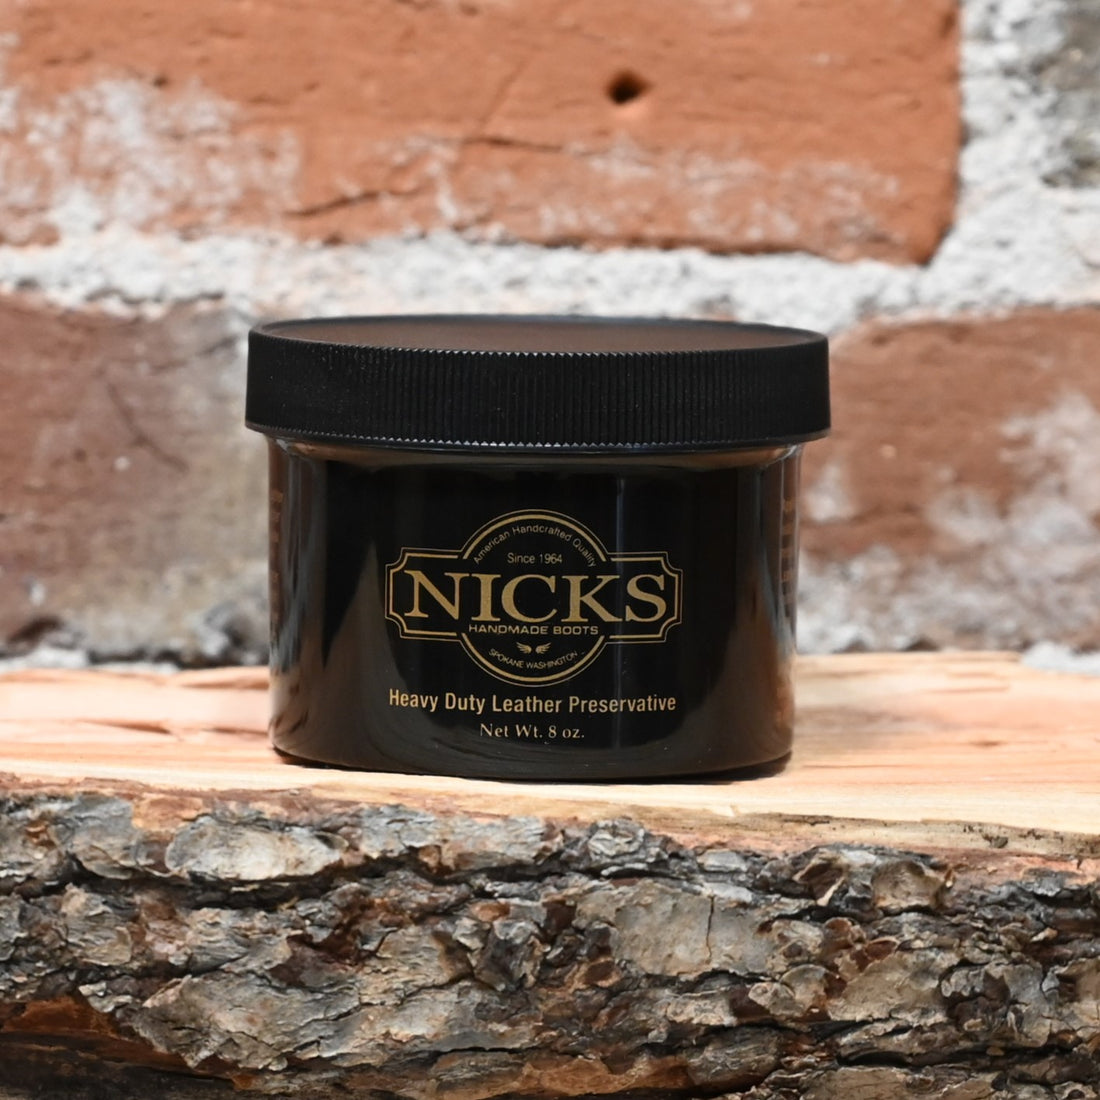 Nicks Hd Grease 8 Oz. view of leather preservative